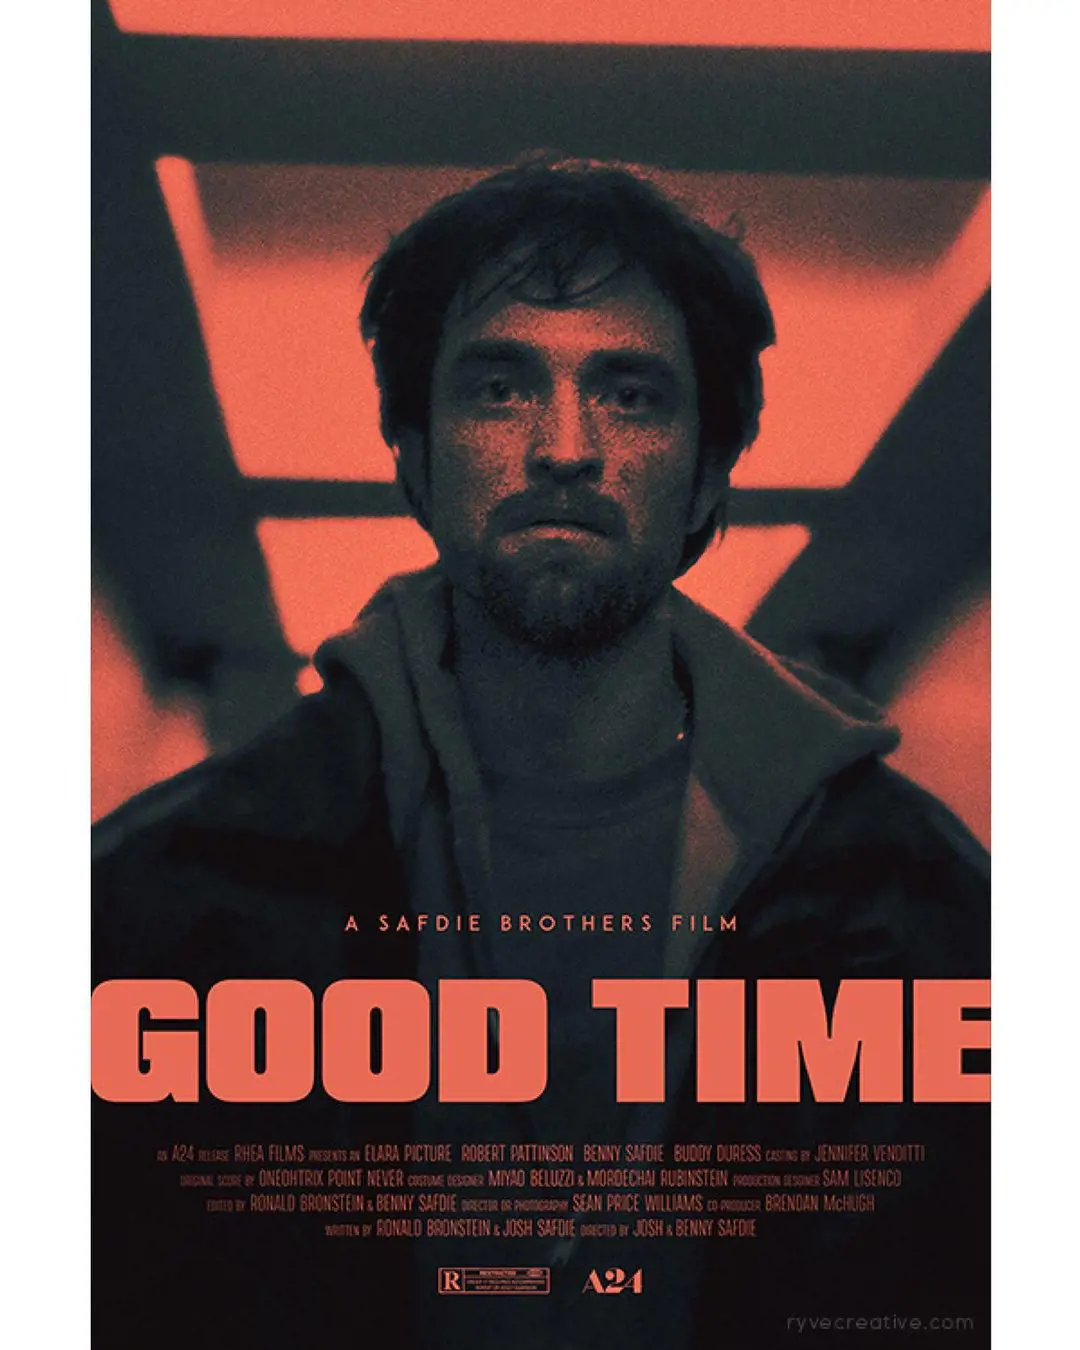 Poster of the 2017 banker movie Good Time 